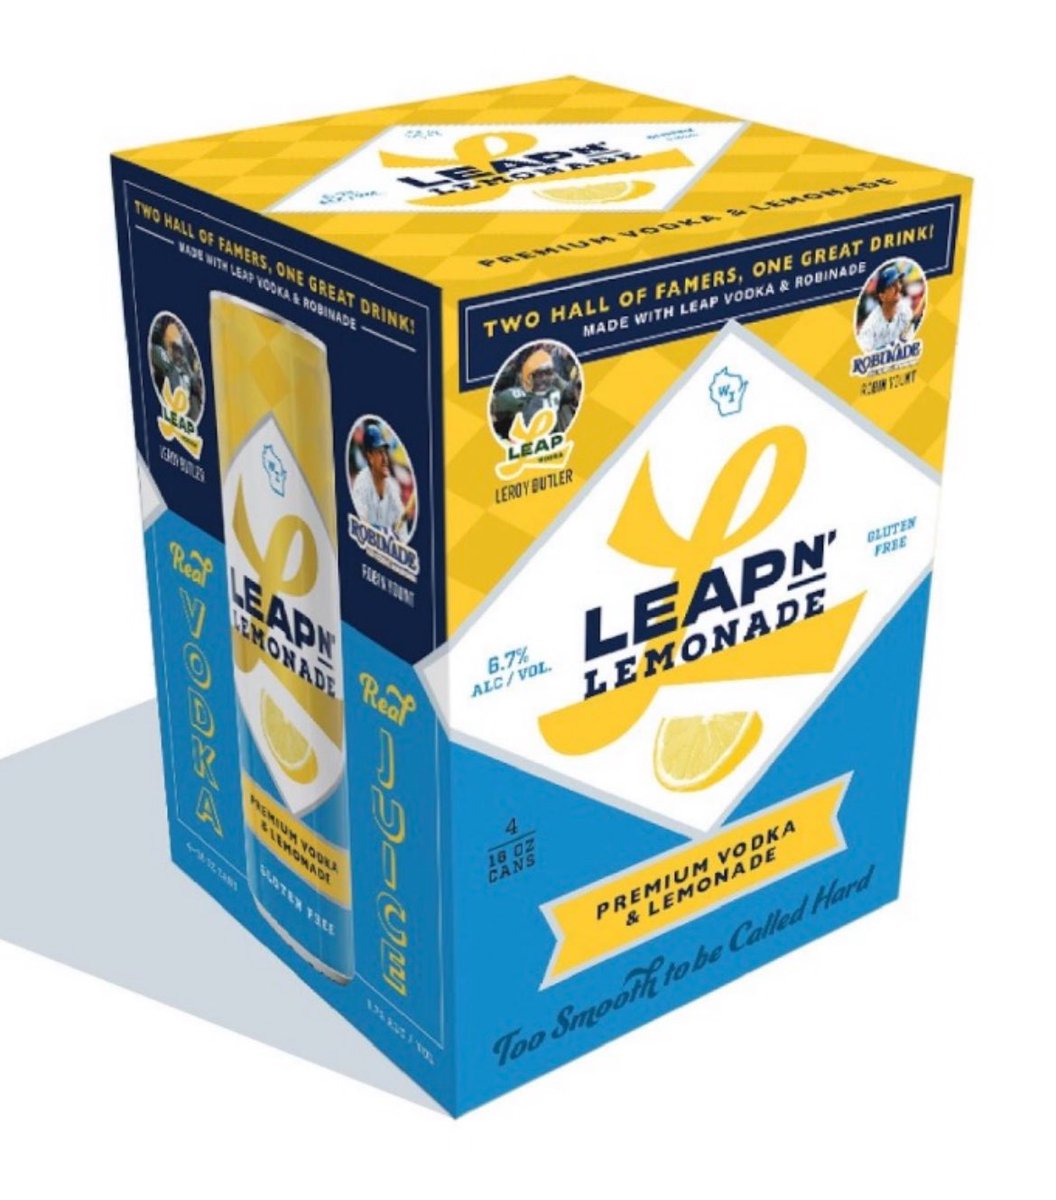 Keep an eye out for original Leap n’ Lemonade (6.7% ABV) and our new Leap n’ Lemonade All Day (4.5% ABV). Proudly handcrafted in Wisconsin. Two Hall-of-Famers, One Great Drink! #wisconsinmade #celebratelikeyouscored #swigforthefences